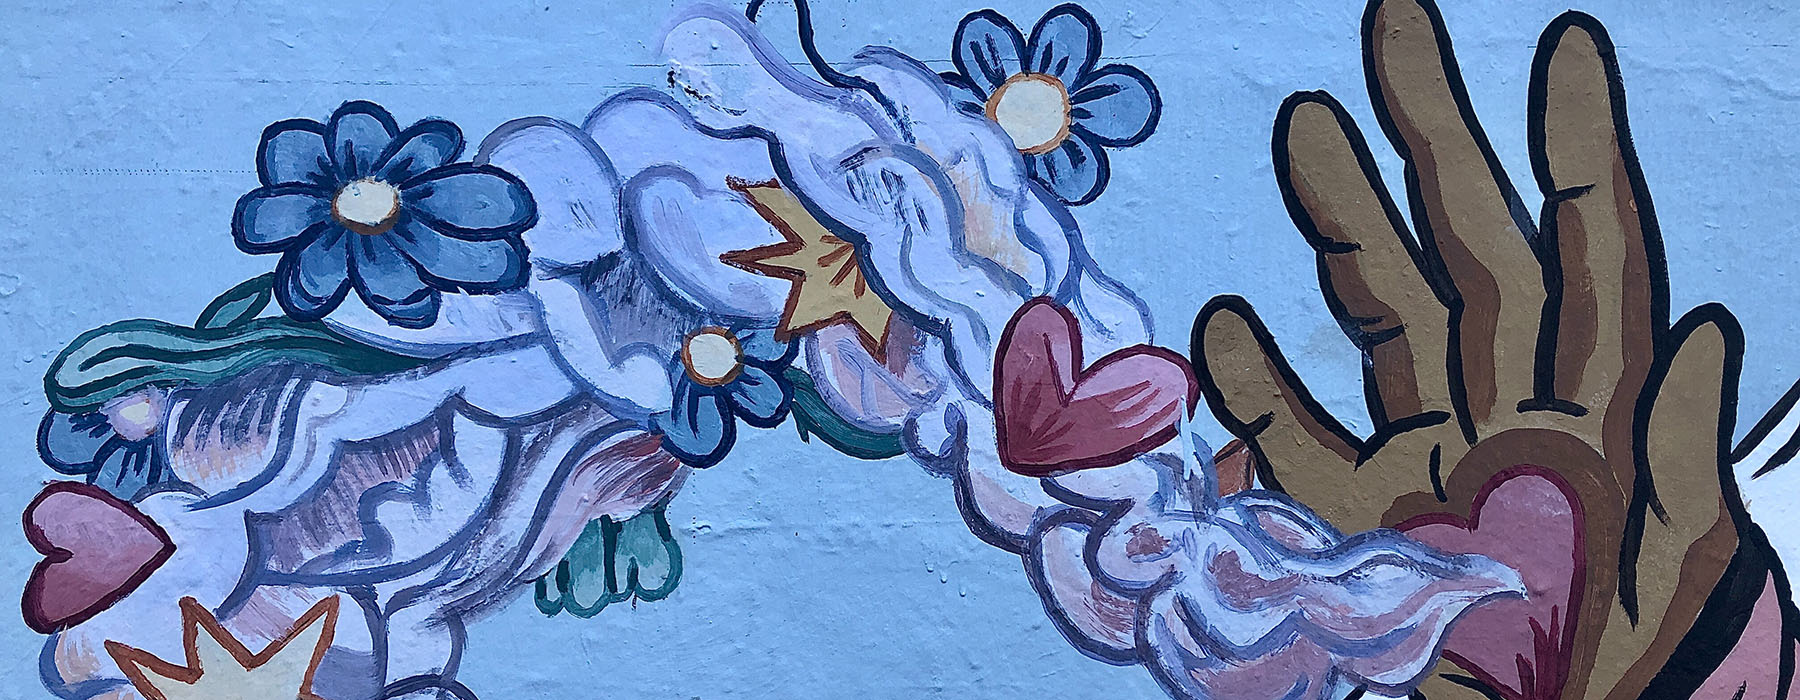 Paintings on a fence of an open hand held up with a love heart on the palm, emitting smoke filled with hearts and flowers